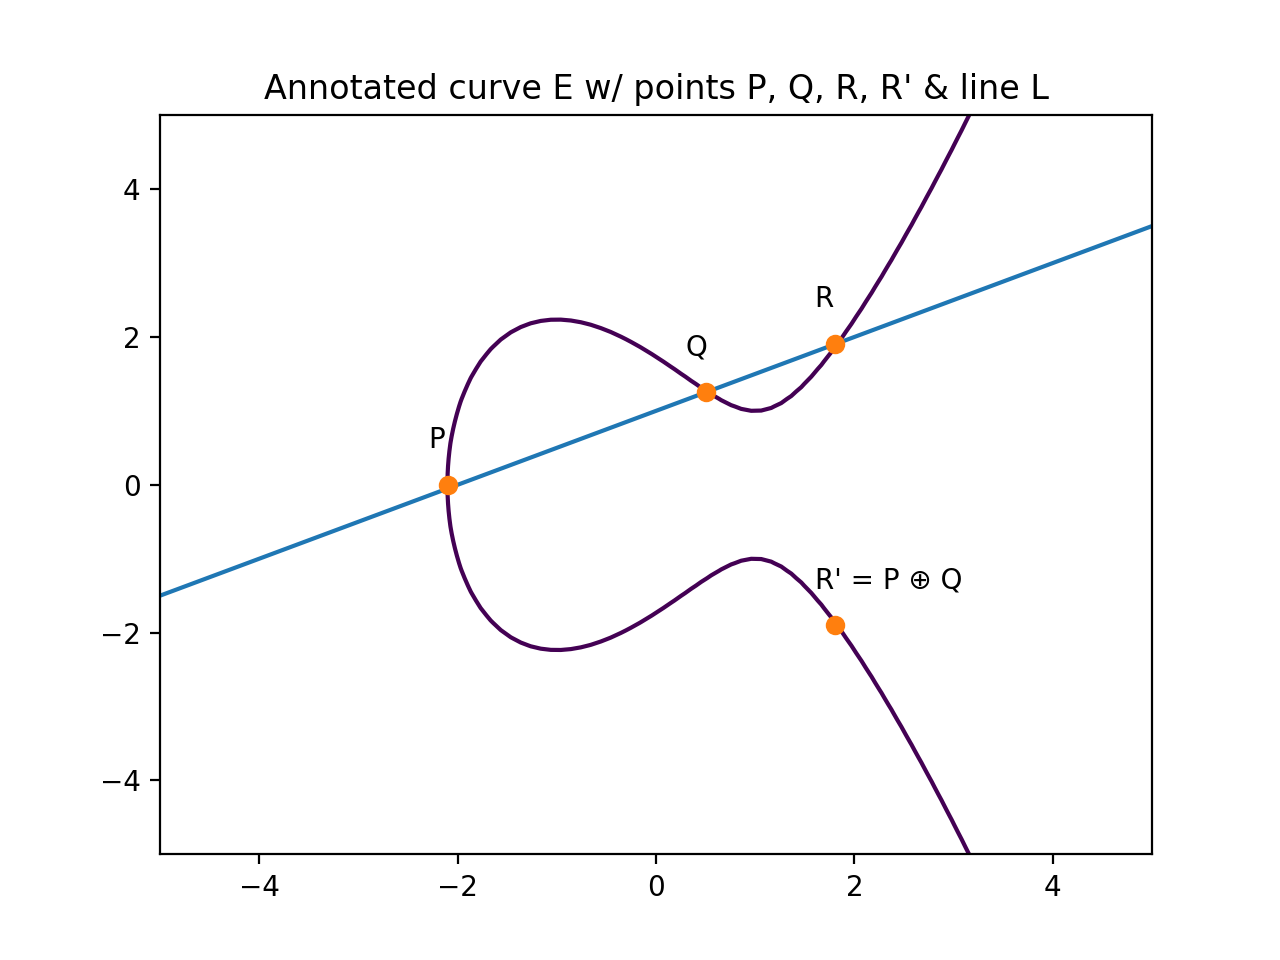 Annotated curve E with points P, Q, R, R' and line L labeled.